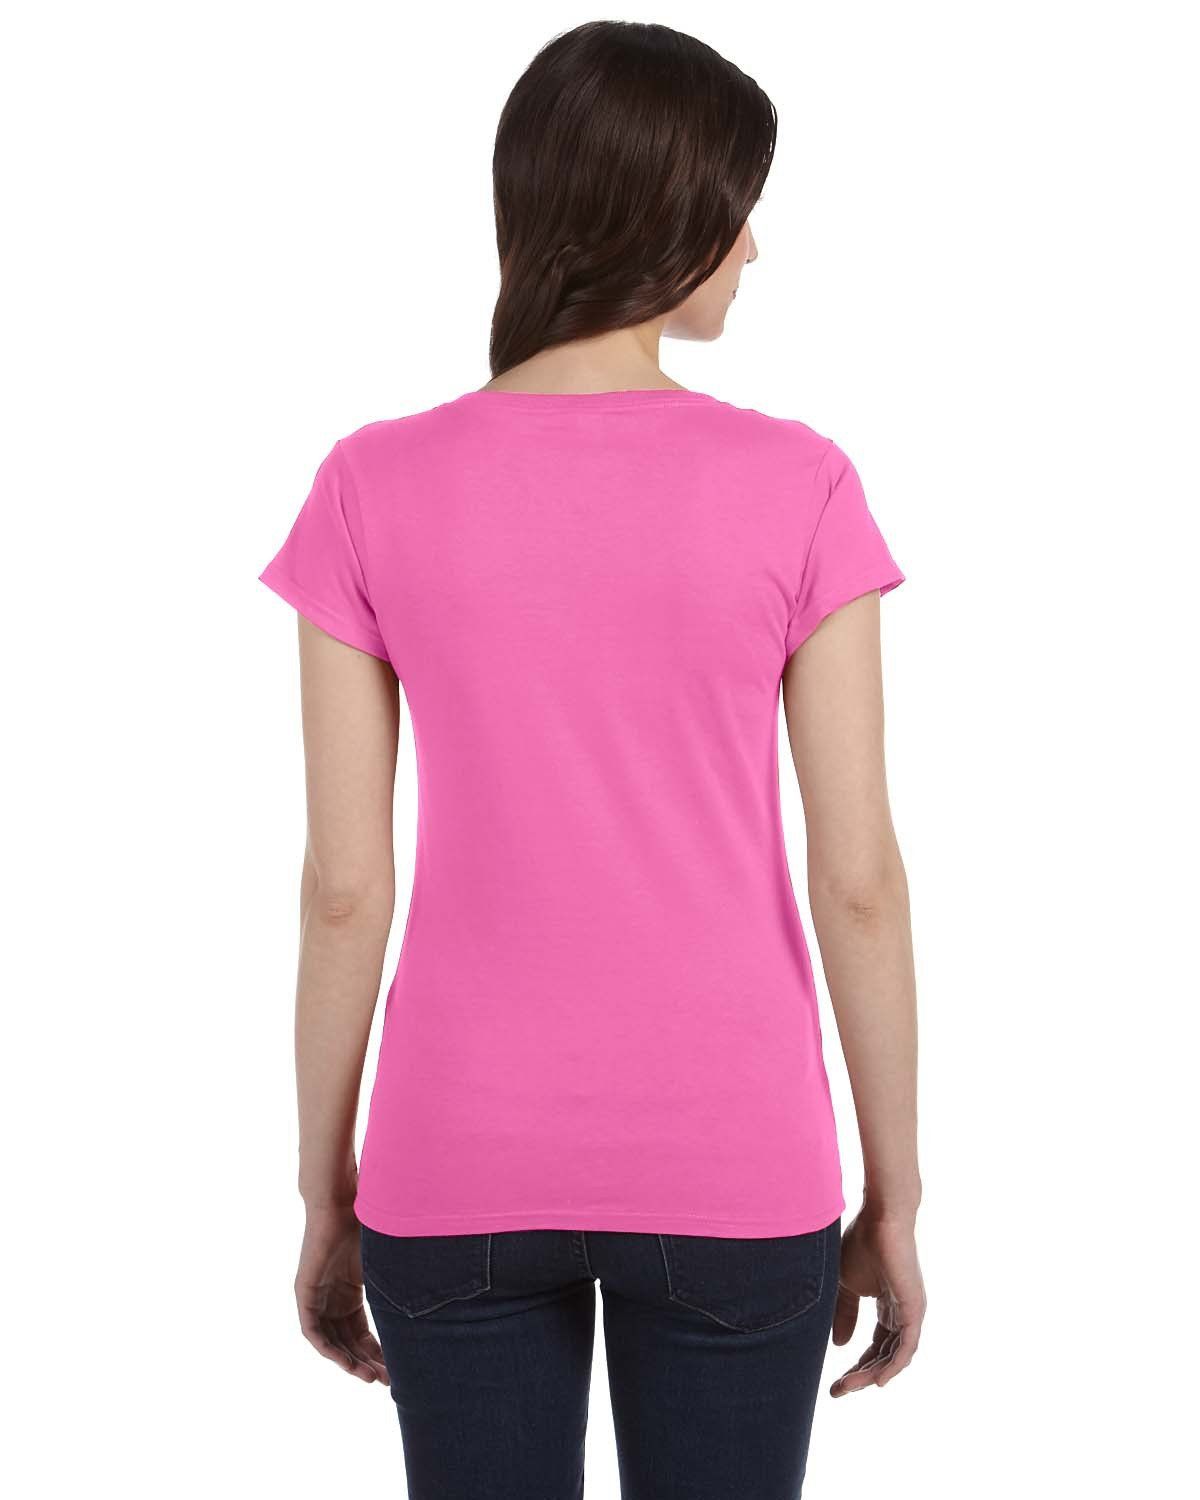 'Gildan G64VL Ladies' SoftStyle Fitted V-Neck T-Shirt'